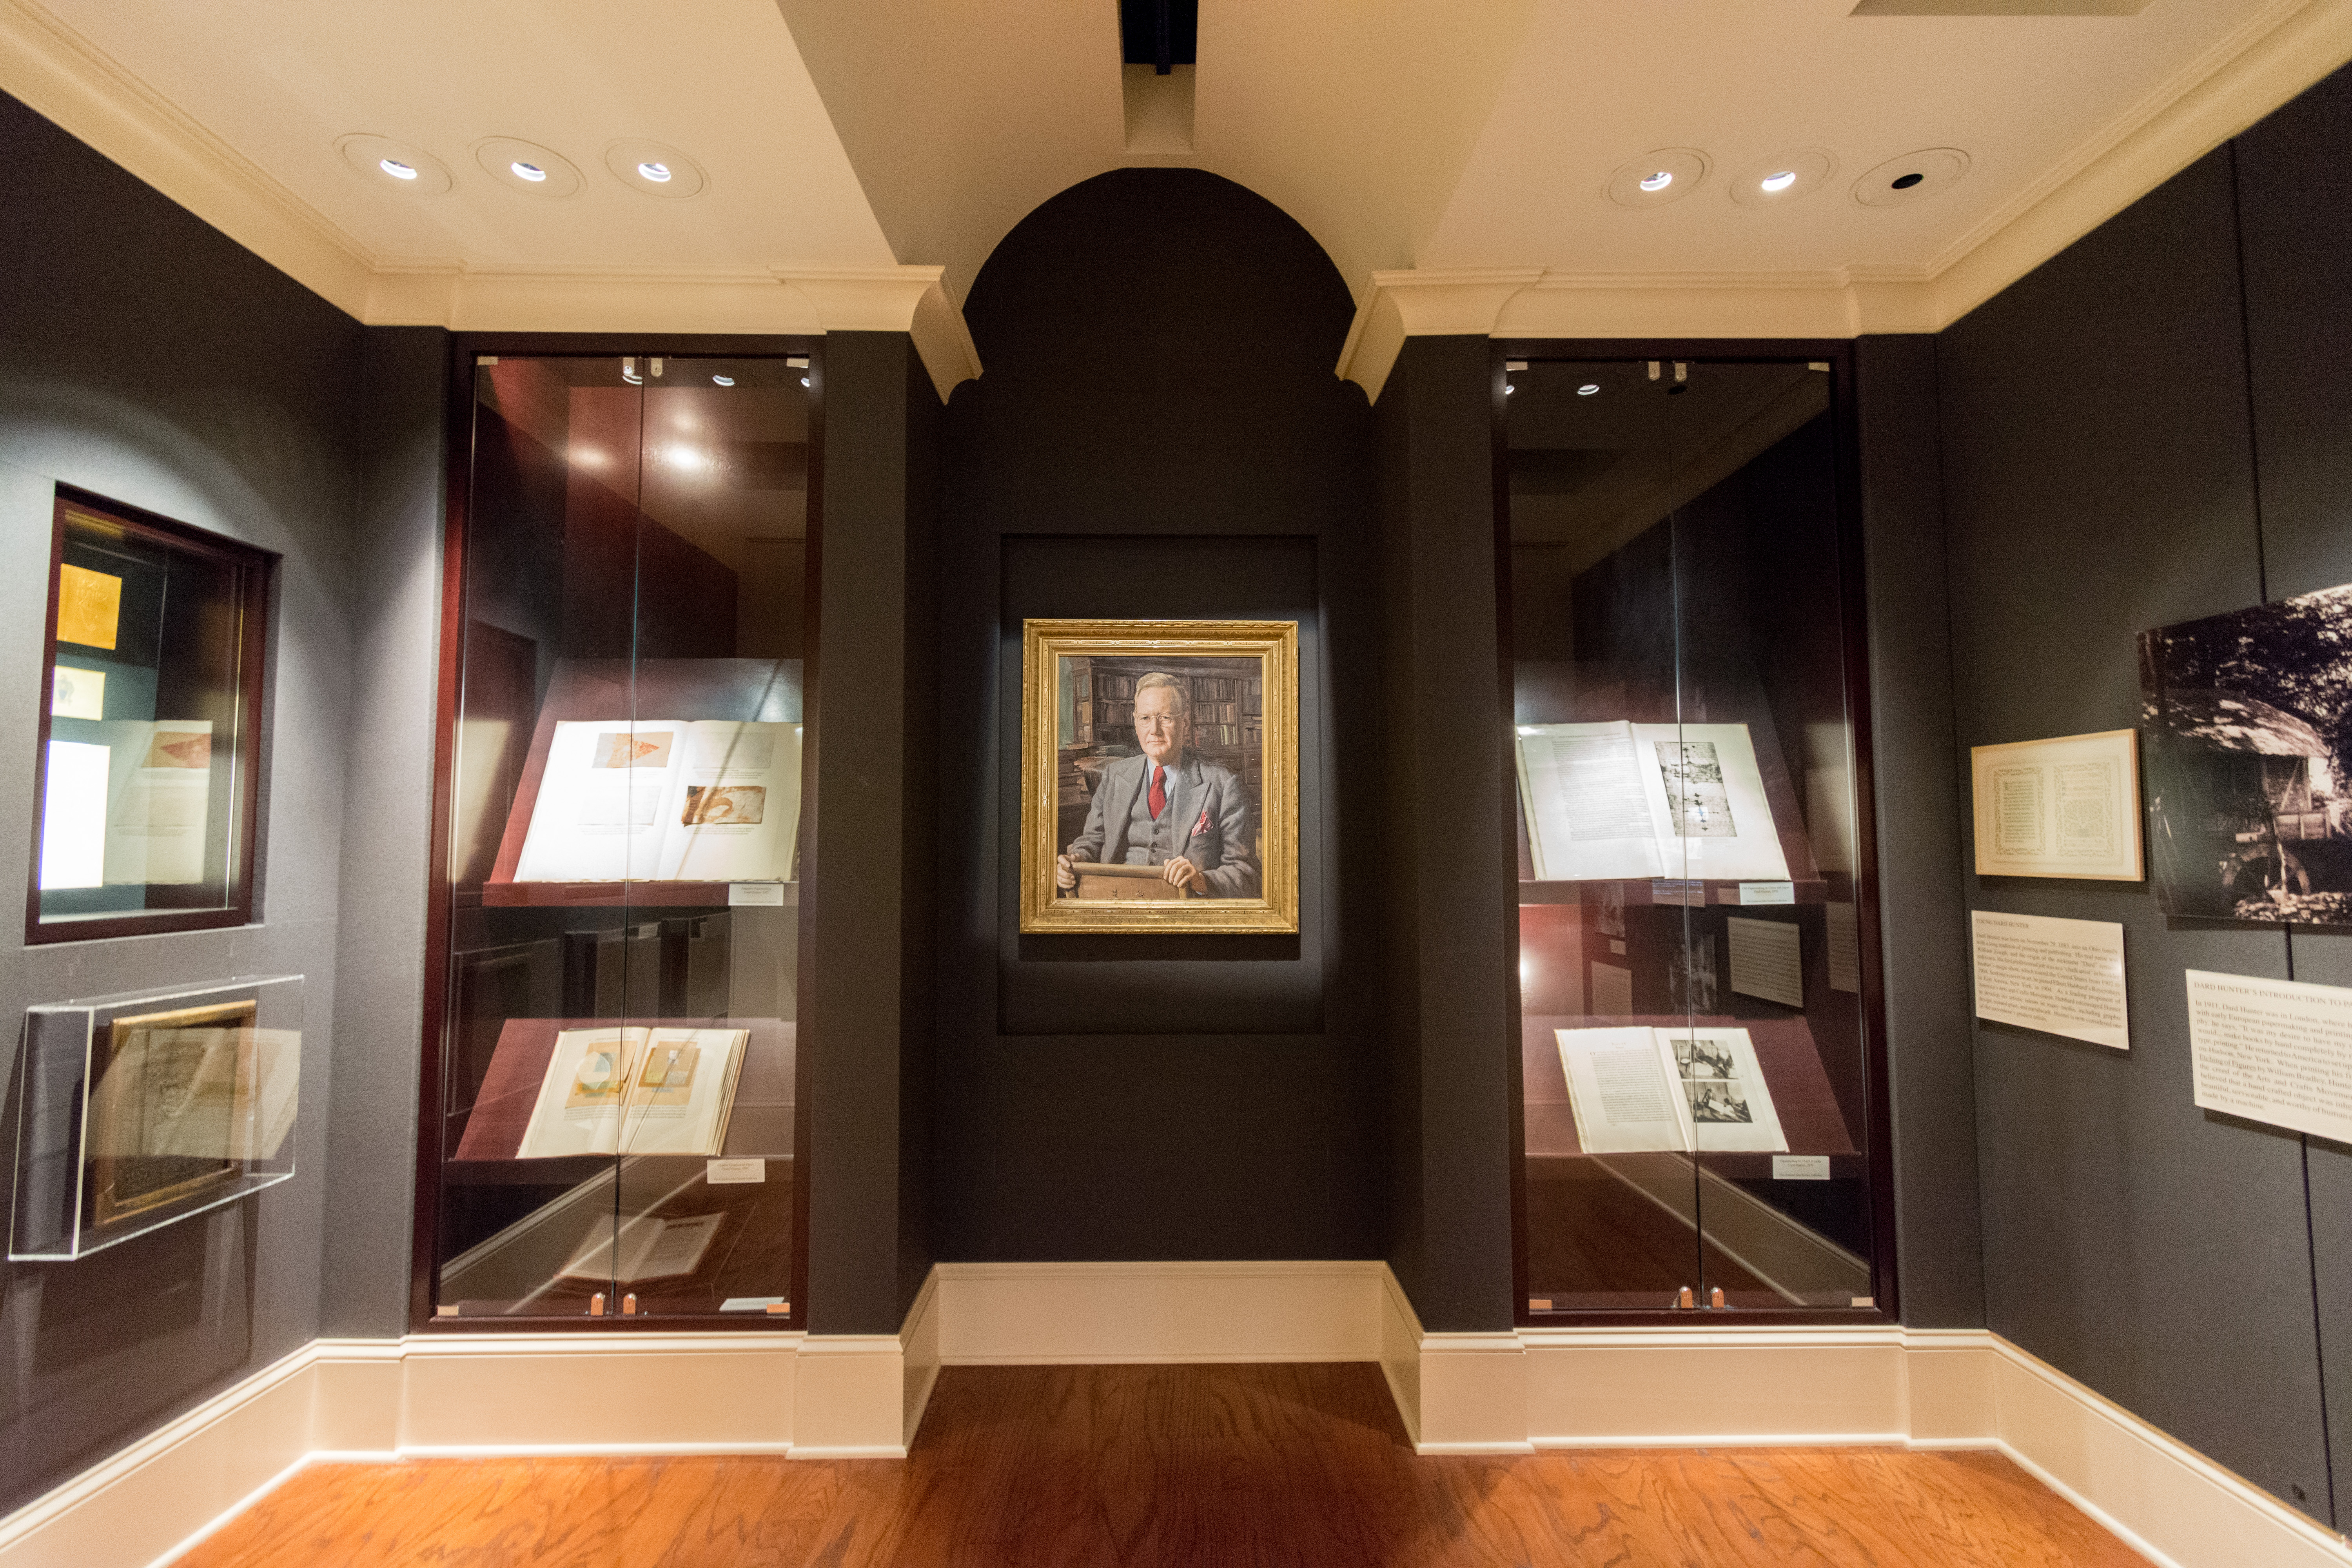 The Dard Hunter Gallery centers a portrait of the Paper Museum founder. On either side of the painted portrait are cases housing handmade books written, typeset, and printed by Dard Hunter.